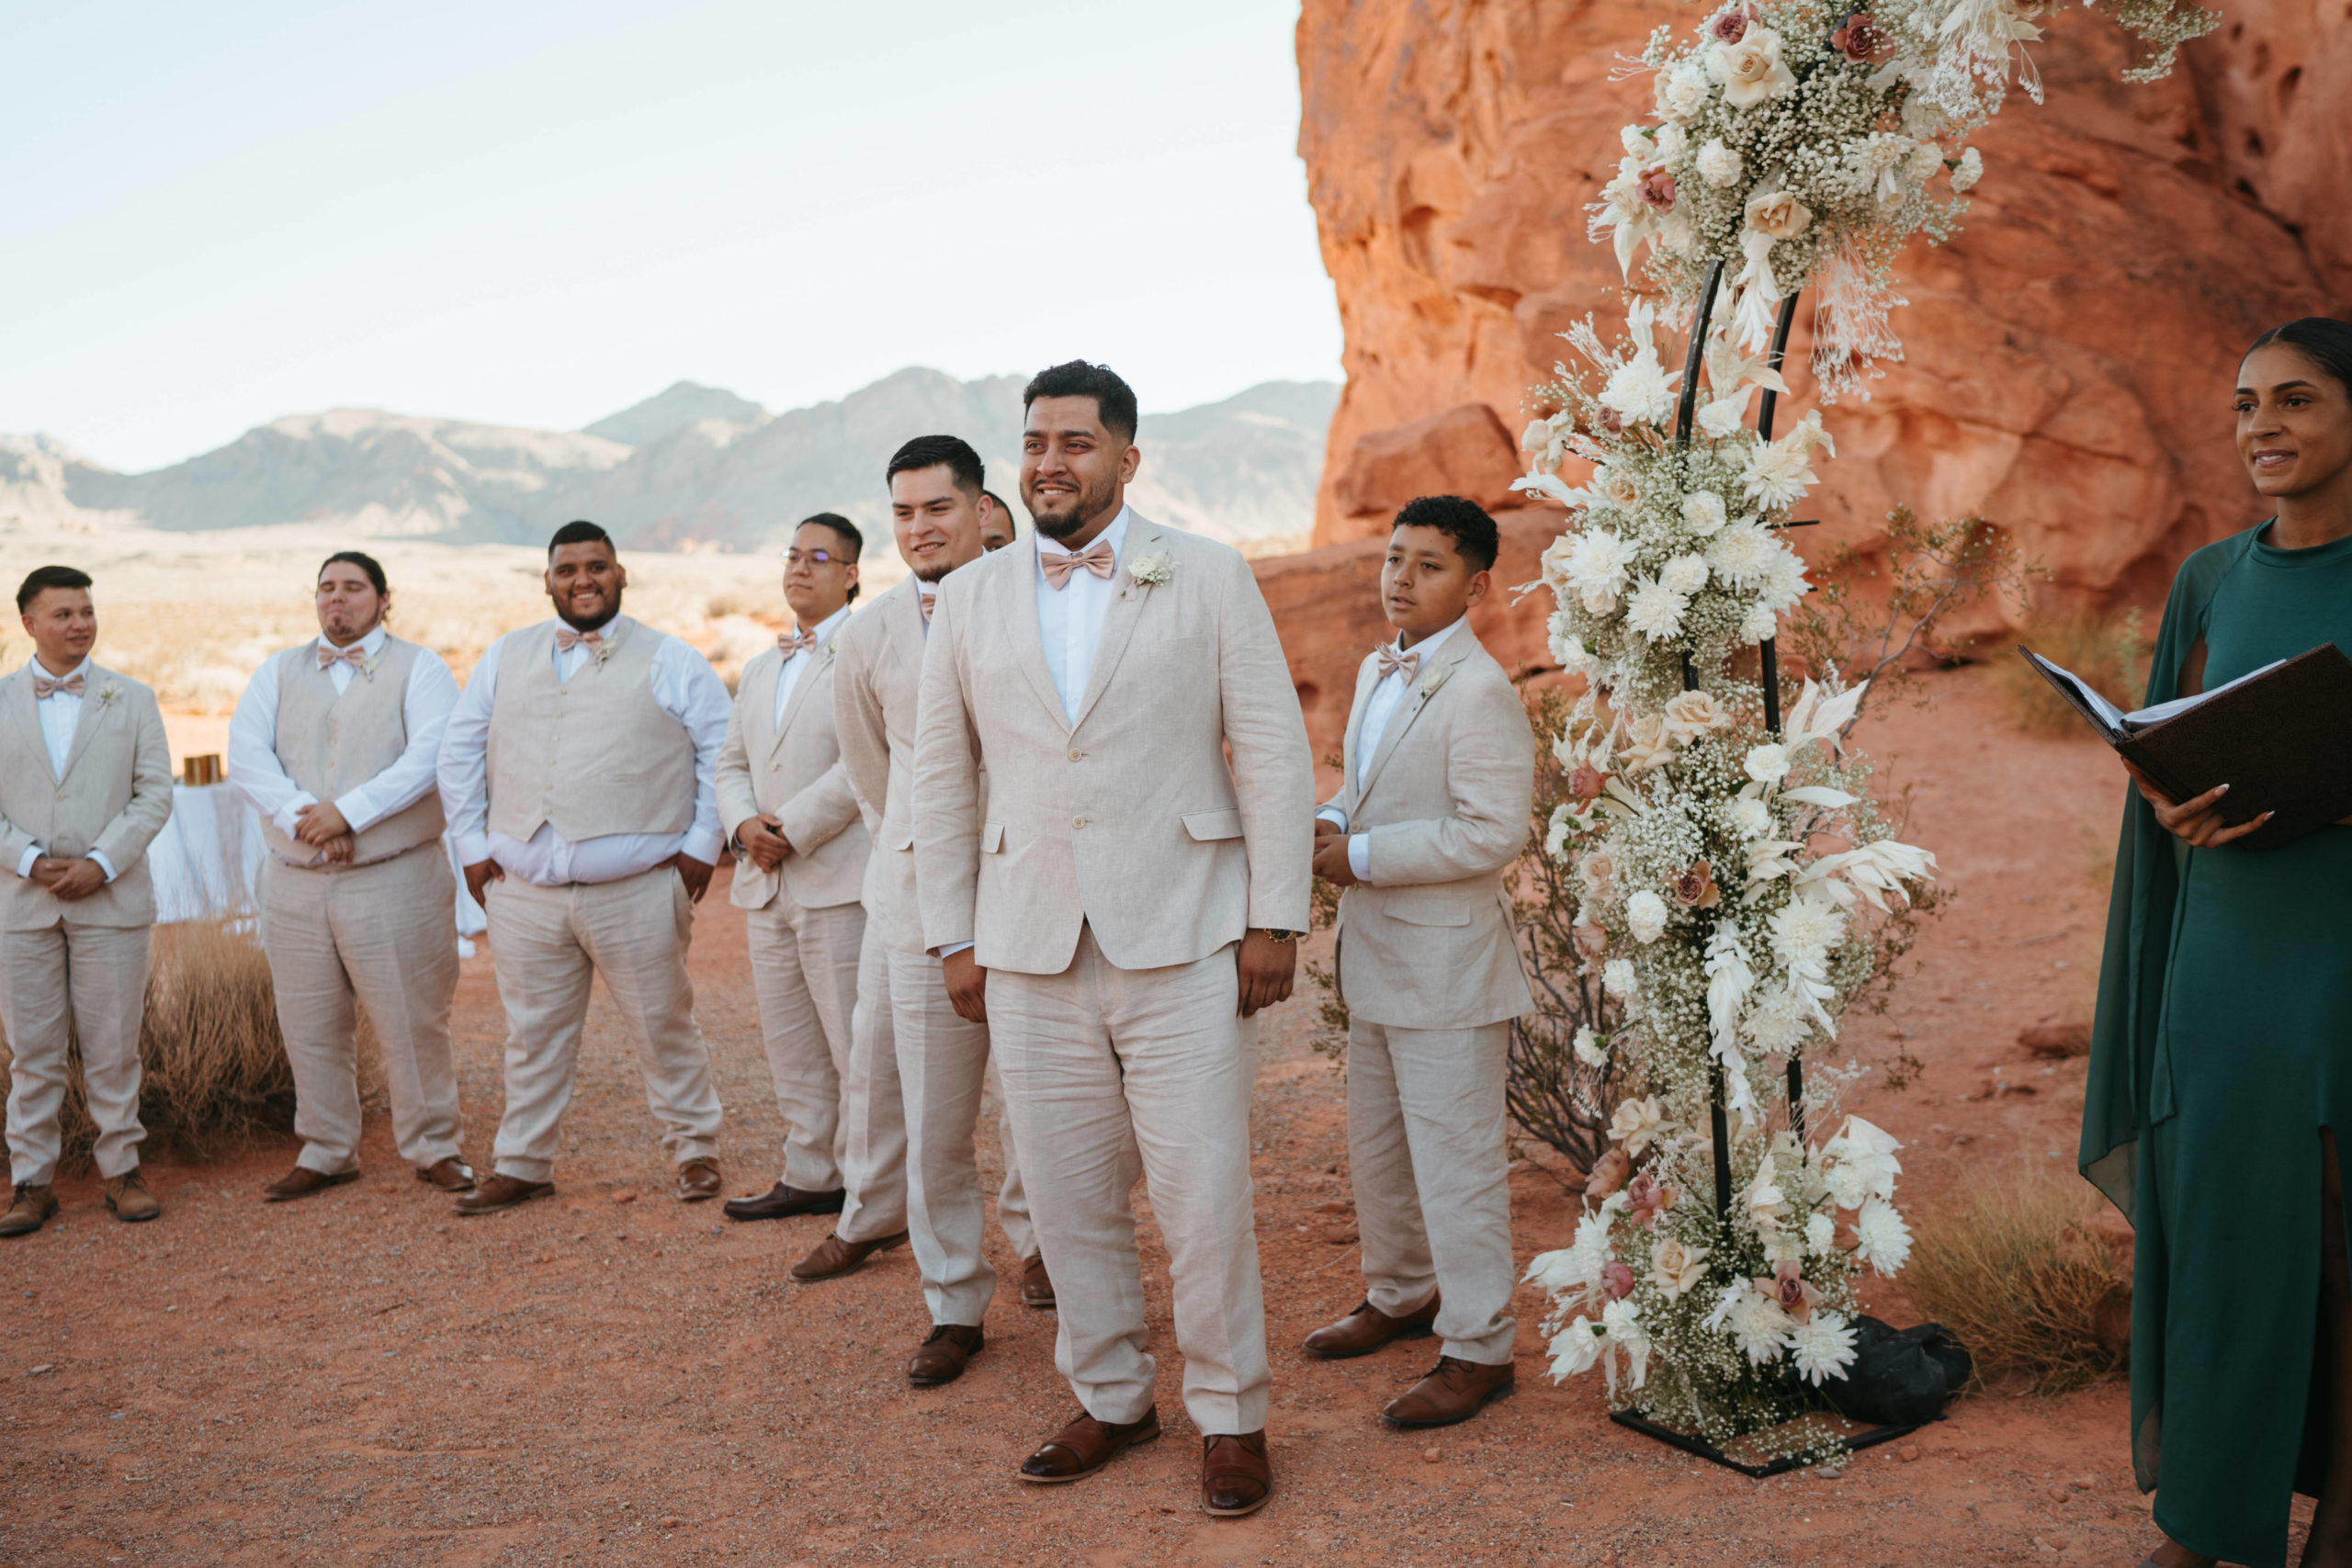 The groom and grooms men at the altar waiting for the bride to walk down the desert aisle